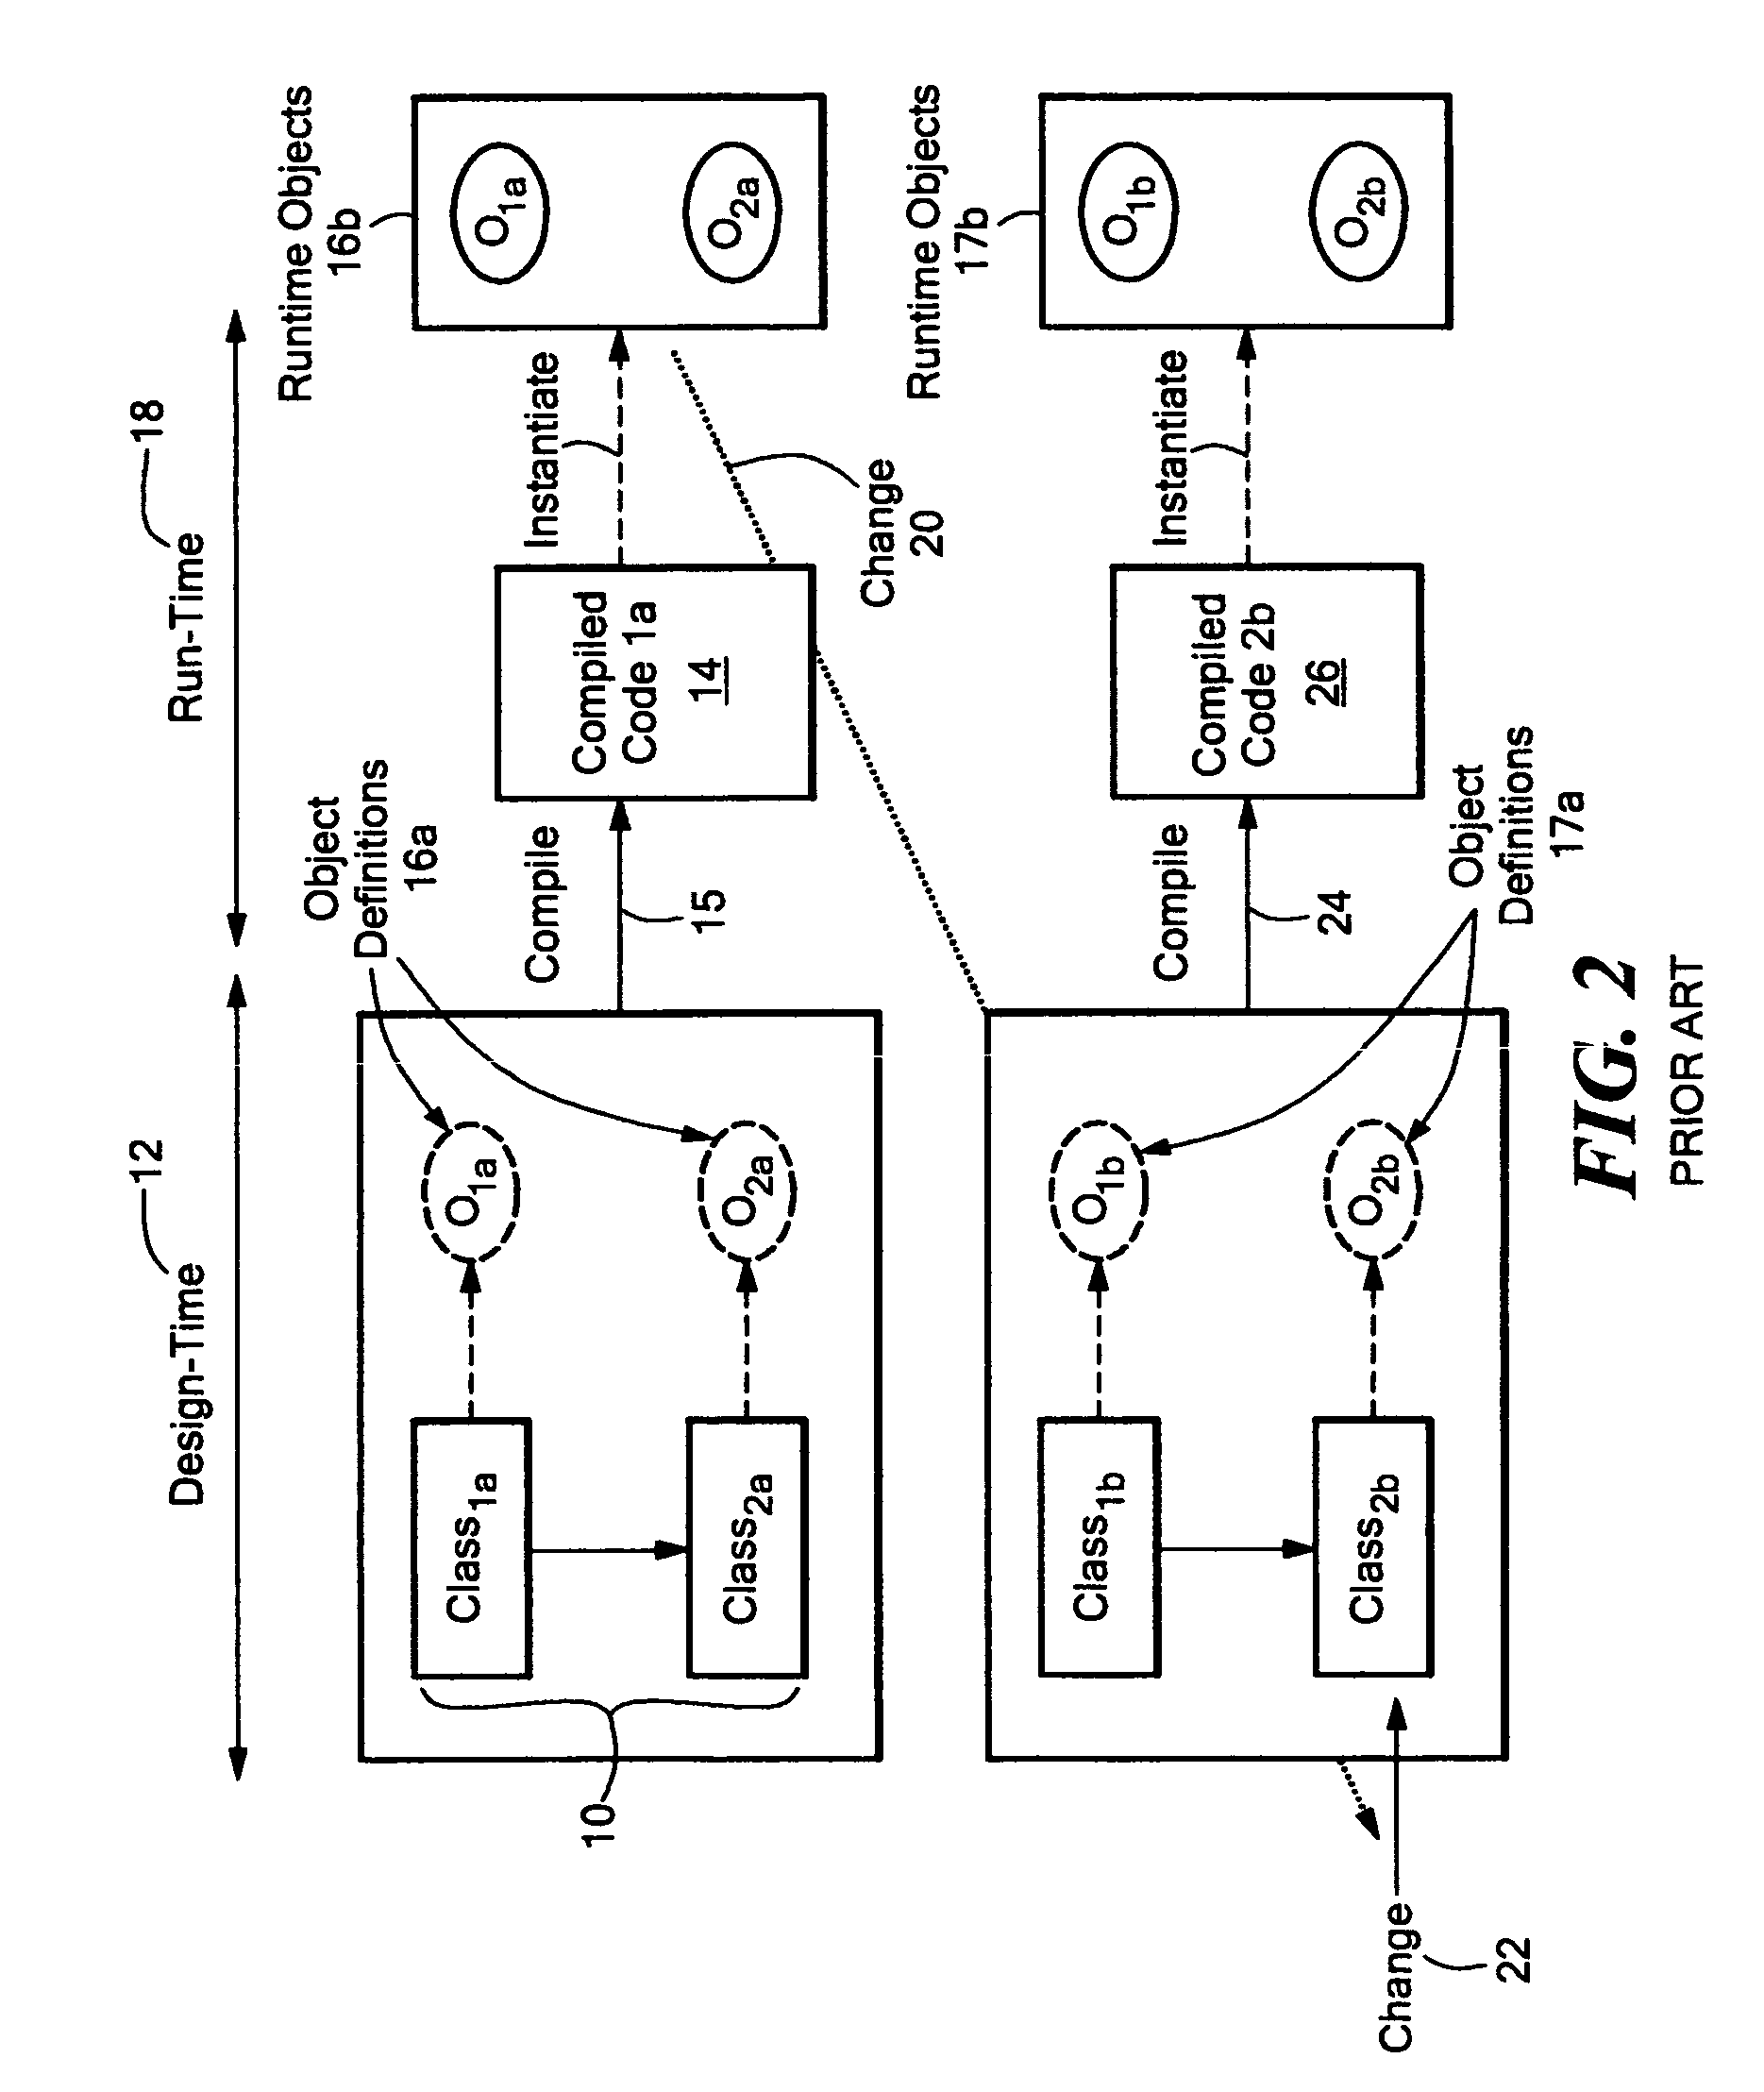 System and method for dynamic late-binding of persistent object implementations in software-based systems